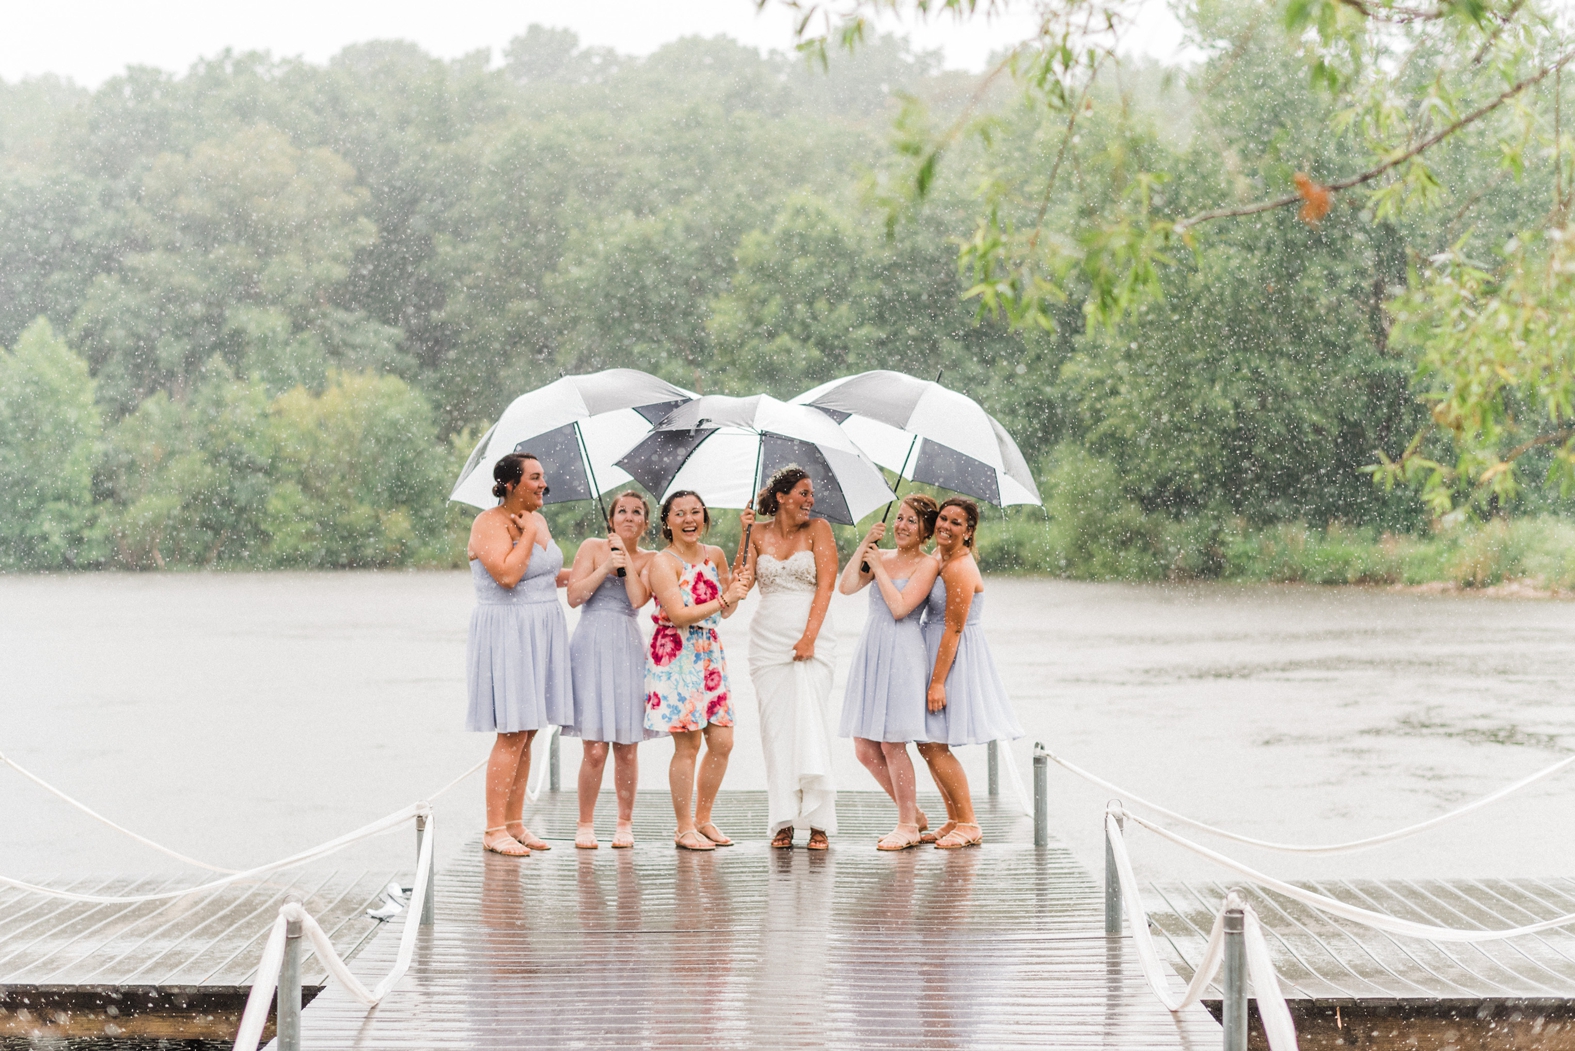 Bride and bridesmaids in rain on dock with black and white umbrellas. Light purple lavender bridesmaids dresses, floral bridesmaid dress.